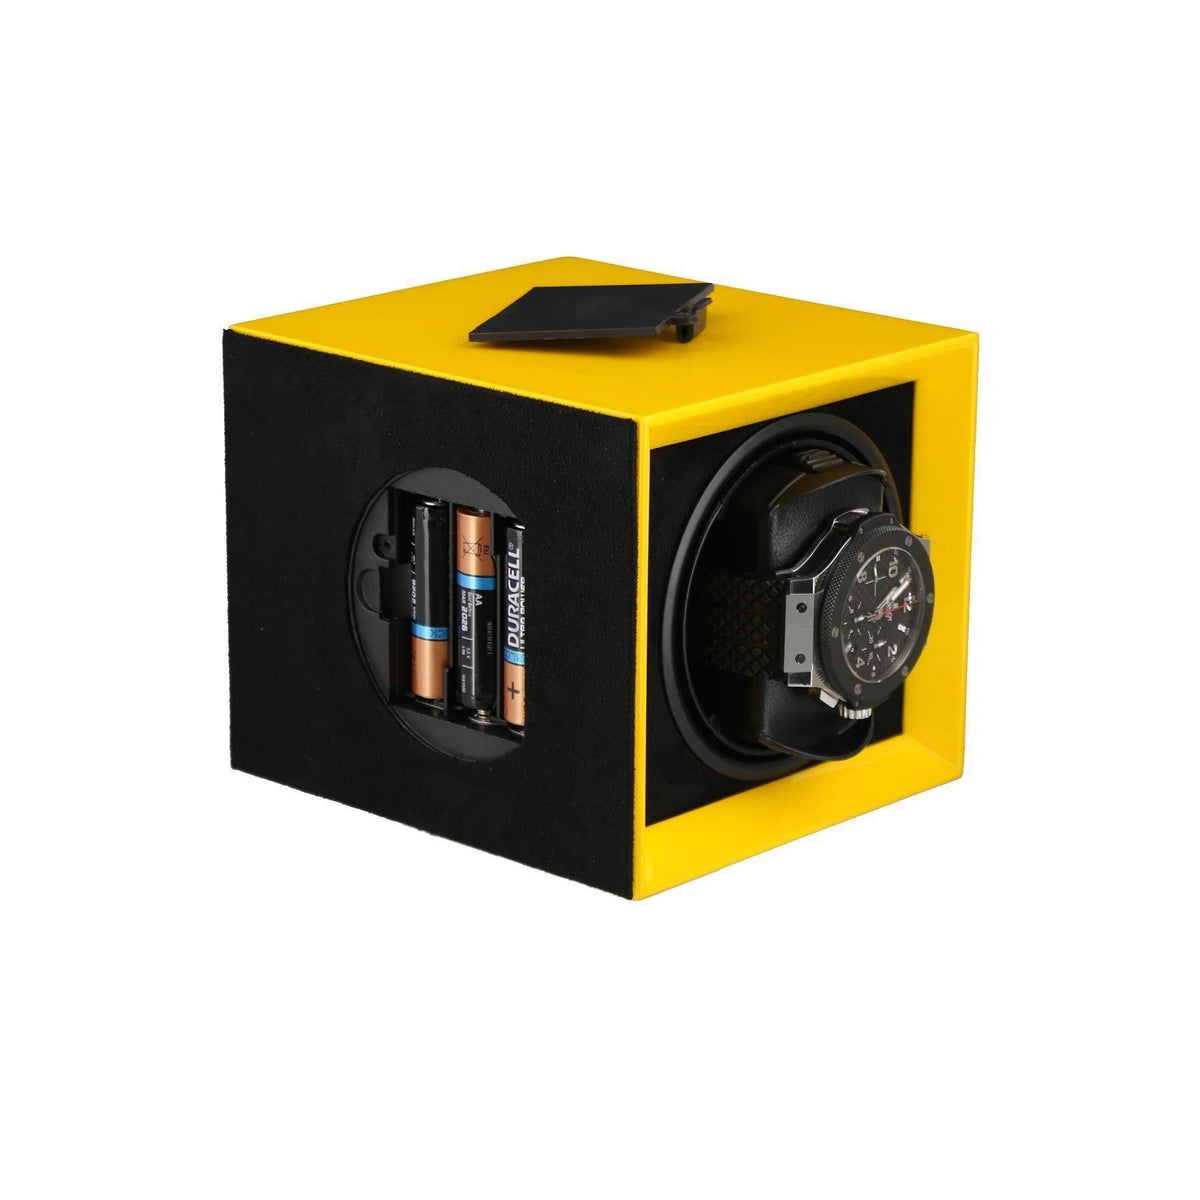 Watch Winder for 1 Automatic Watch in Yellow Mains or Battery by Aevitas